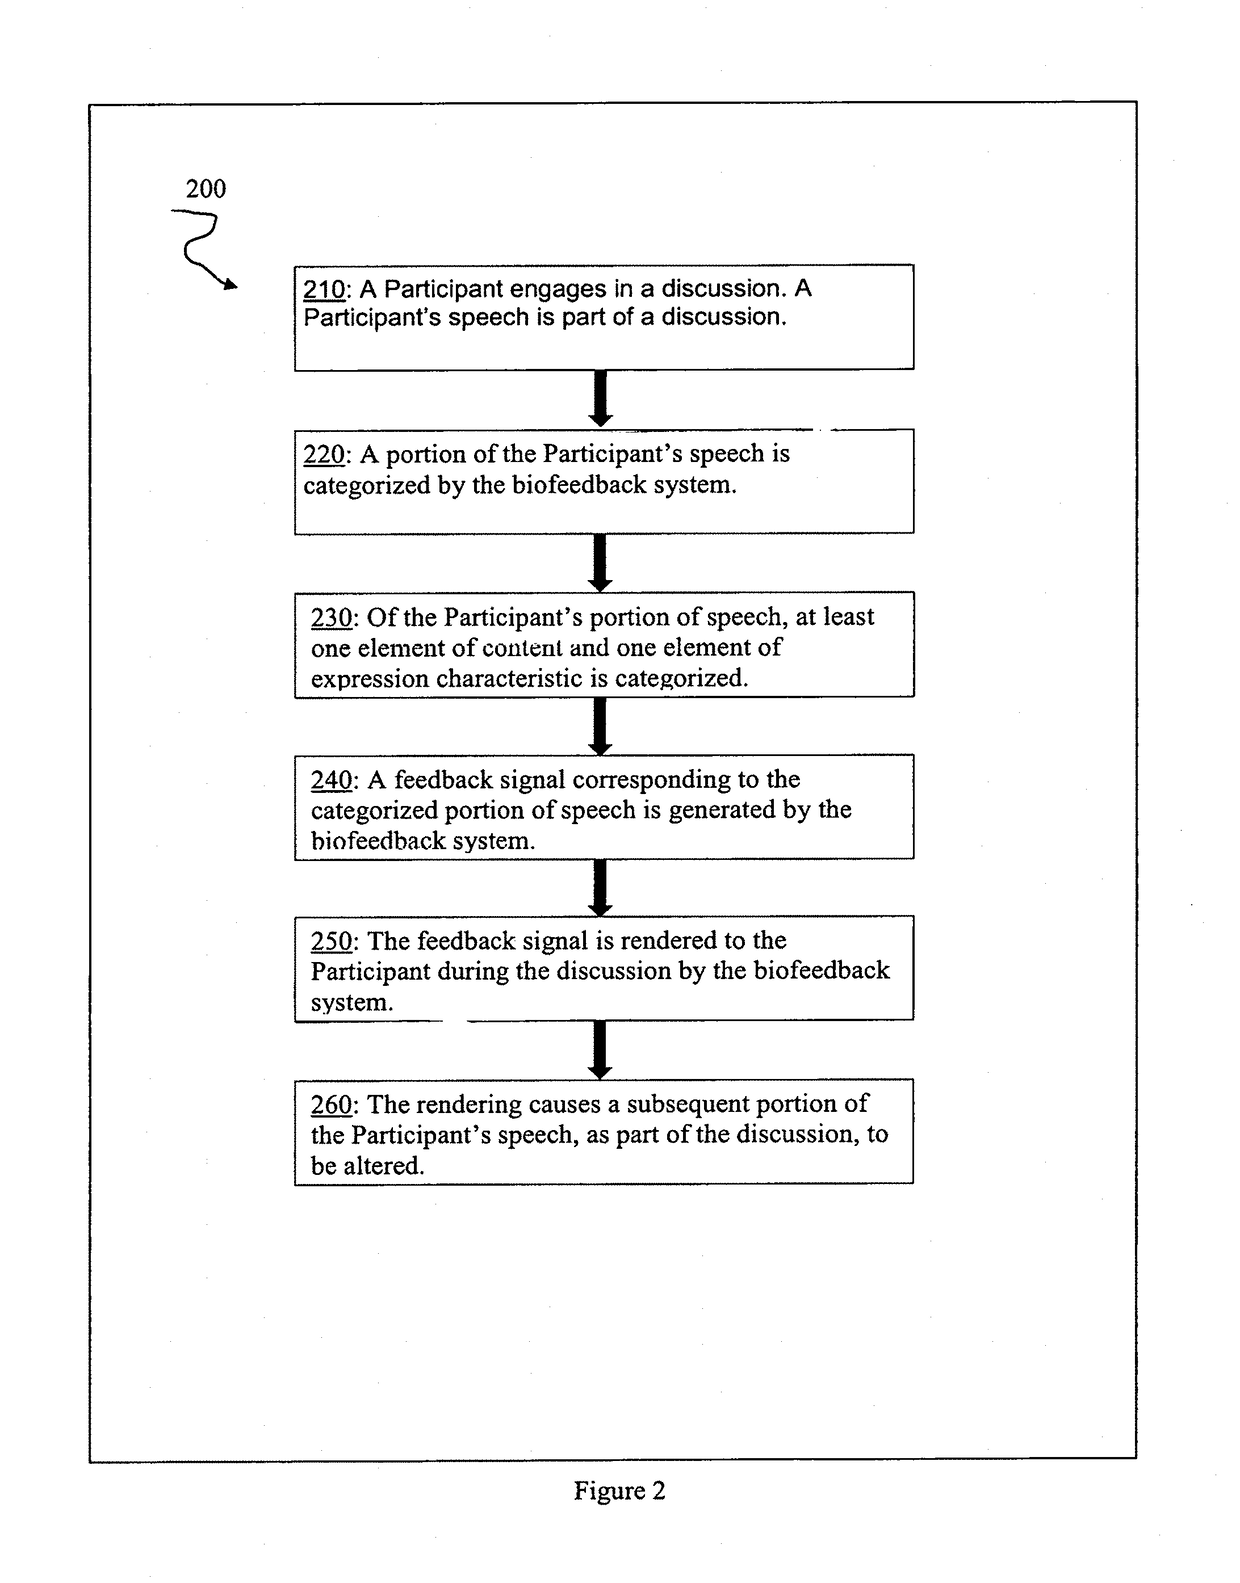 Systems, apparatus and methods for using biofeedback for altering speech